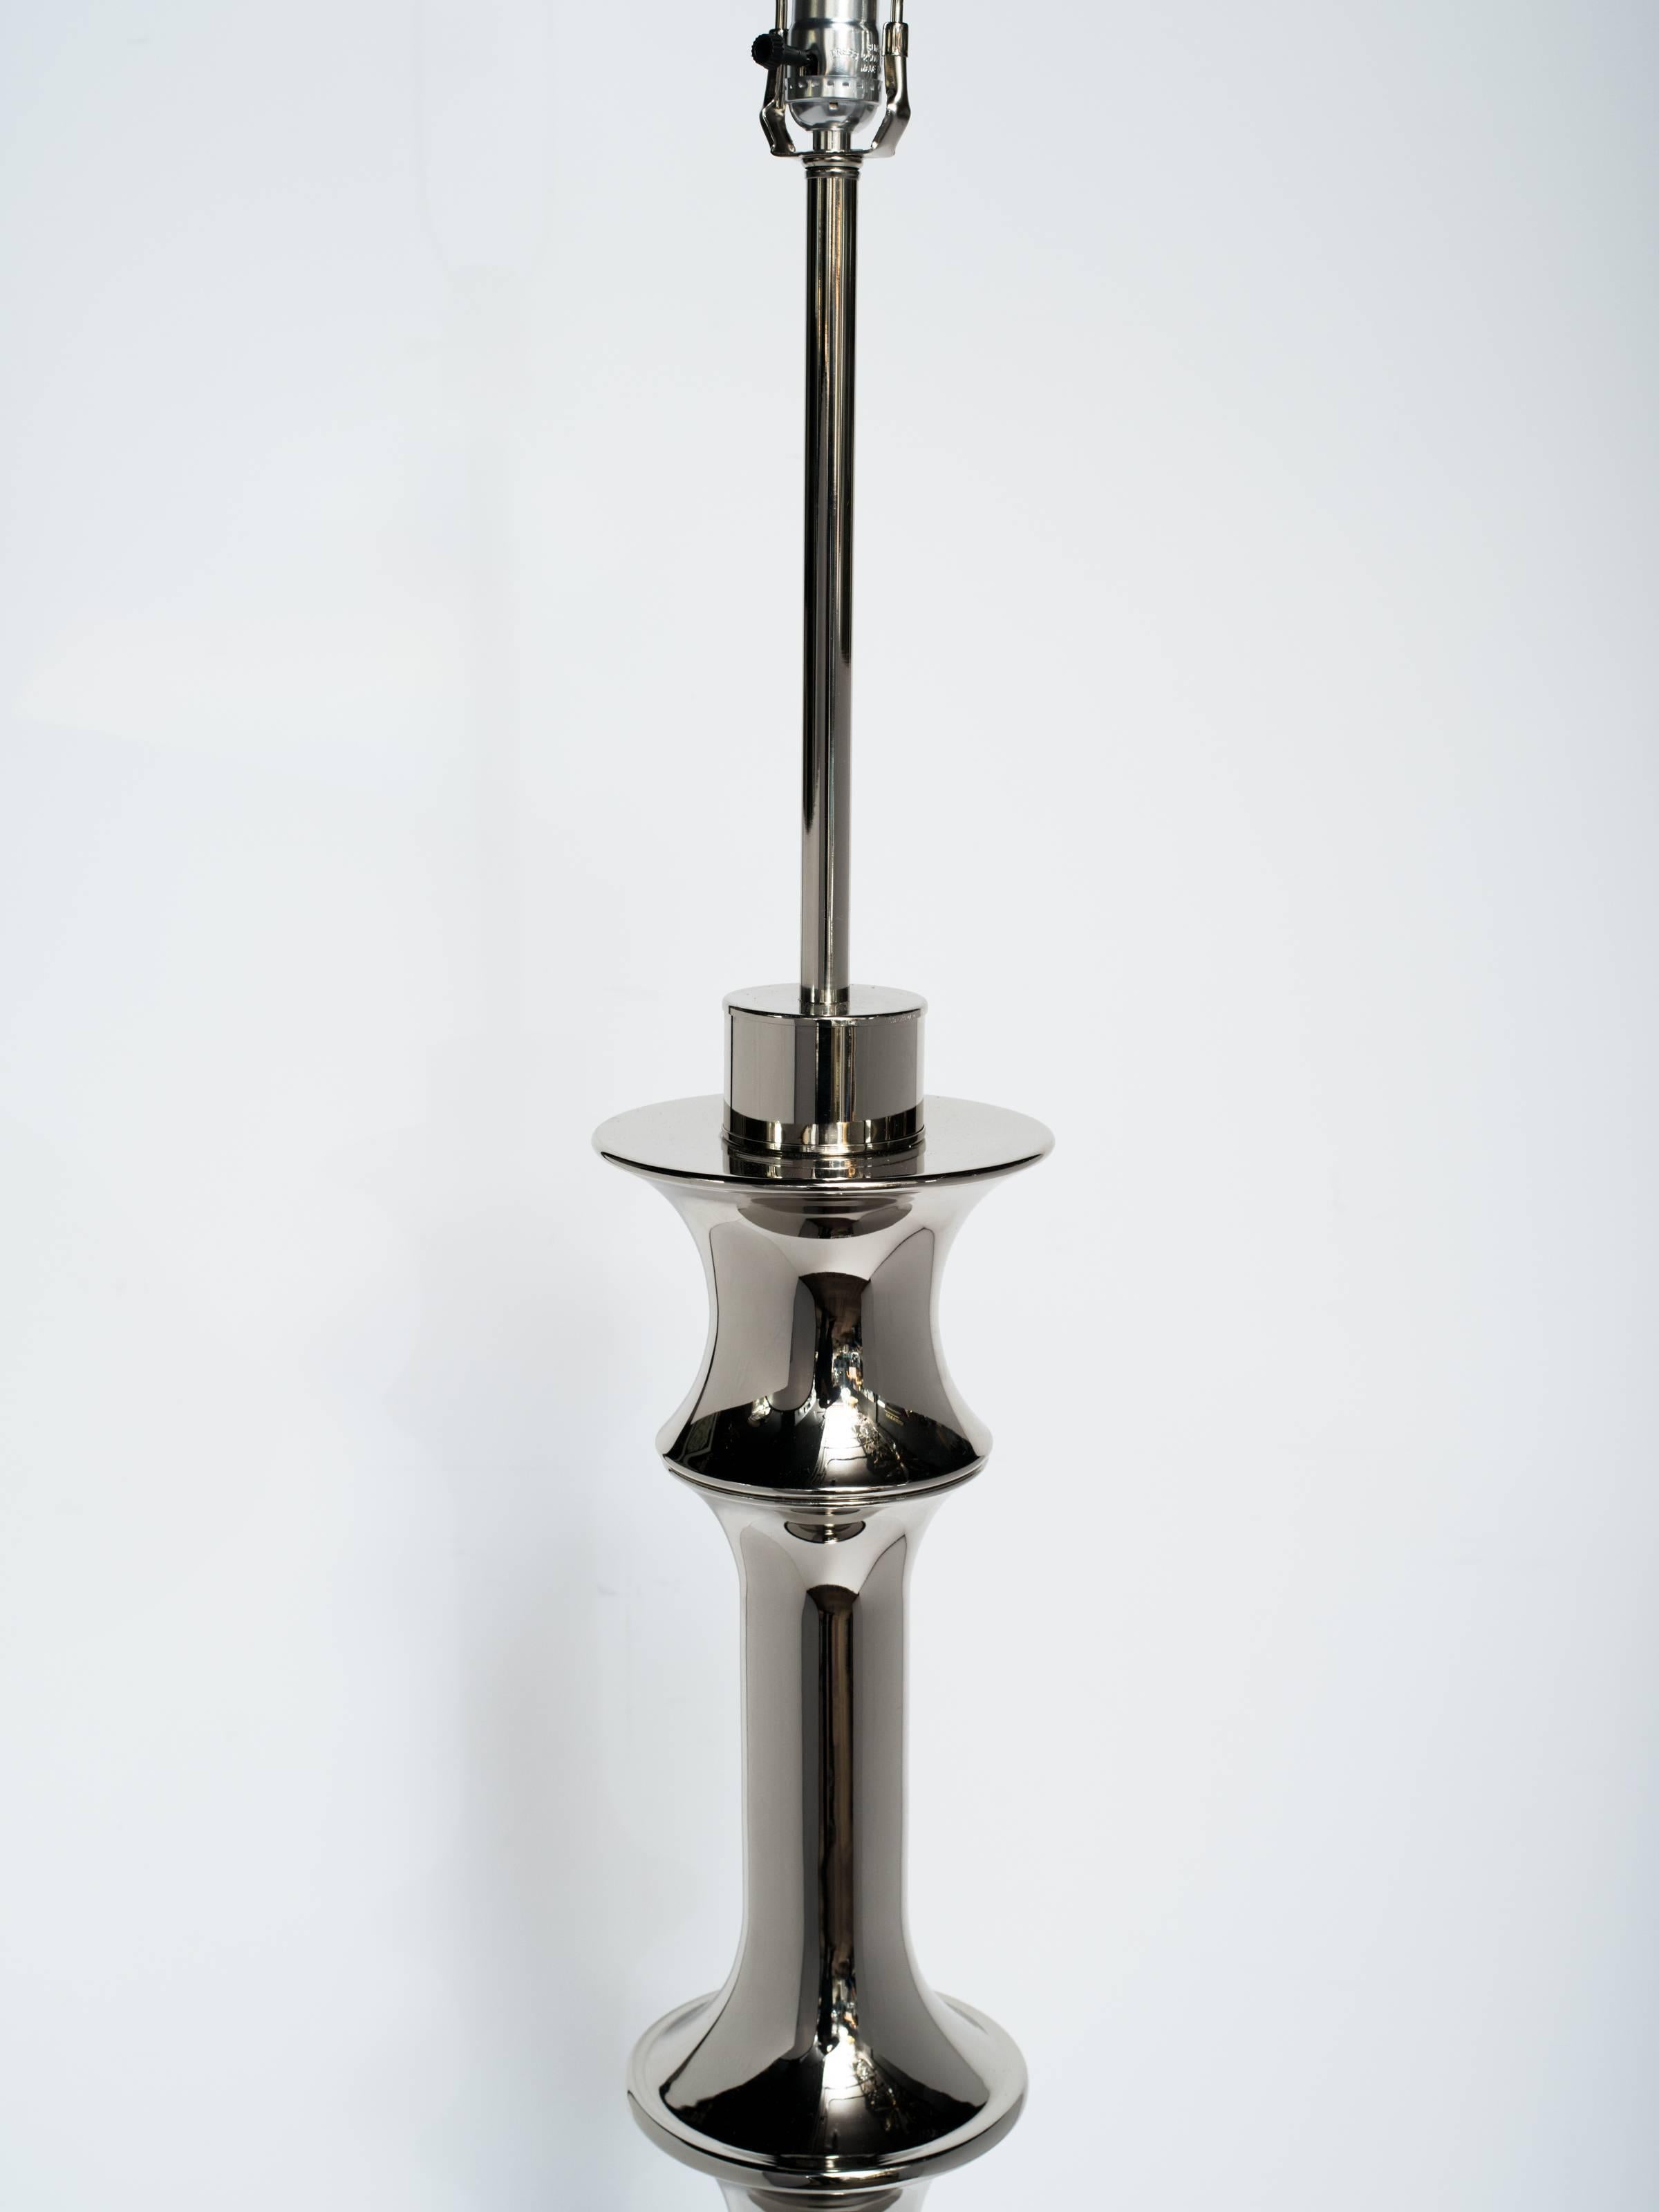 Late 20th Century Pair of Sculptural Chess Piece Floor Lamps in Nickel, c. 1980's For Sale